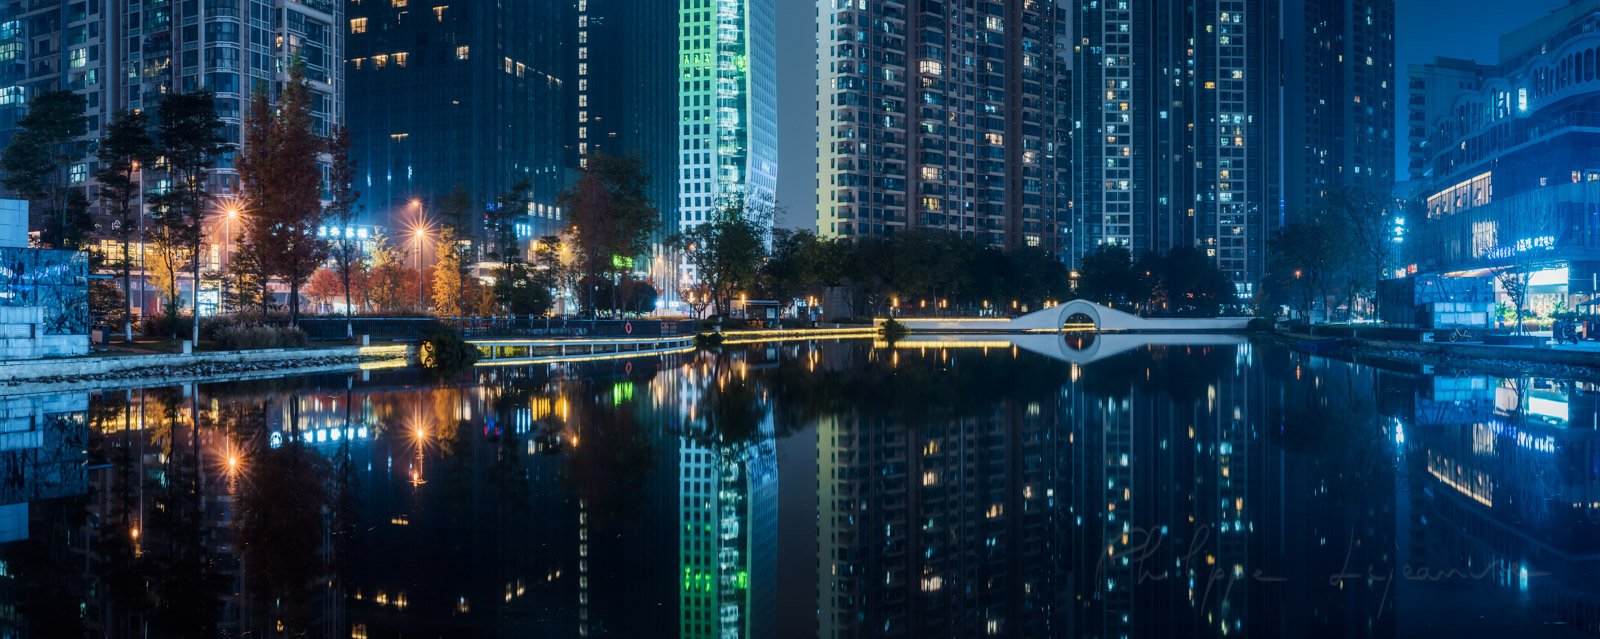 Illuminated skycrapers reflecting in a pond panorama at night in Chengdu, Sichuan province, China